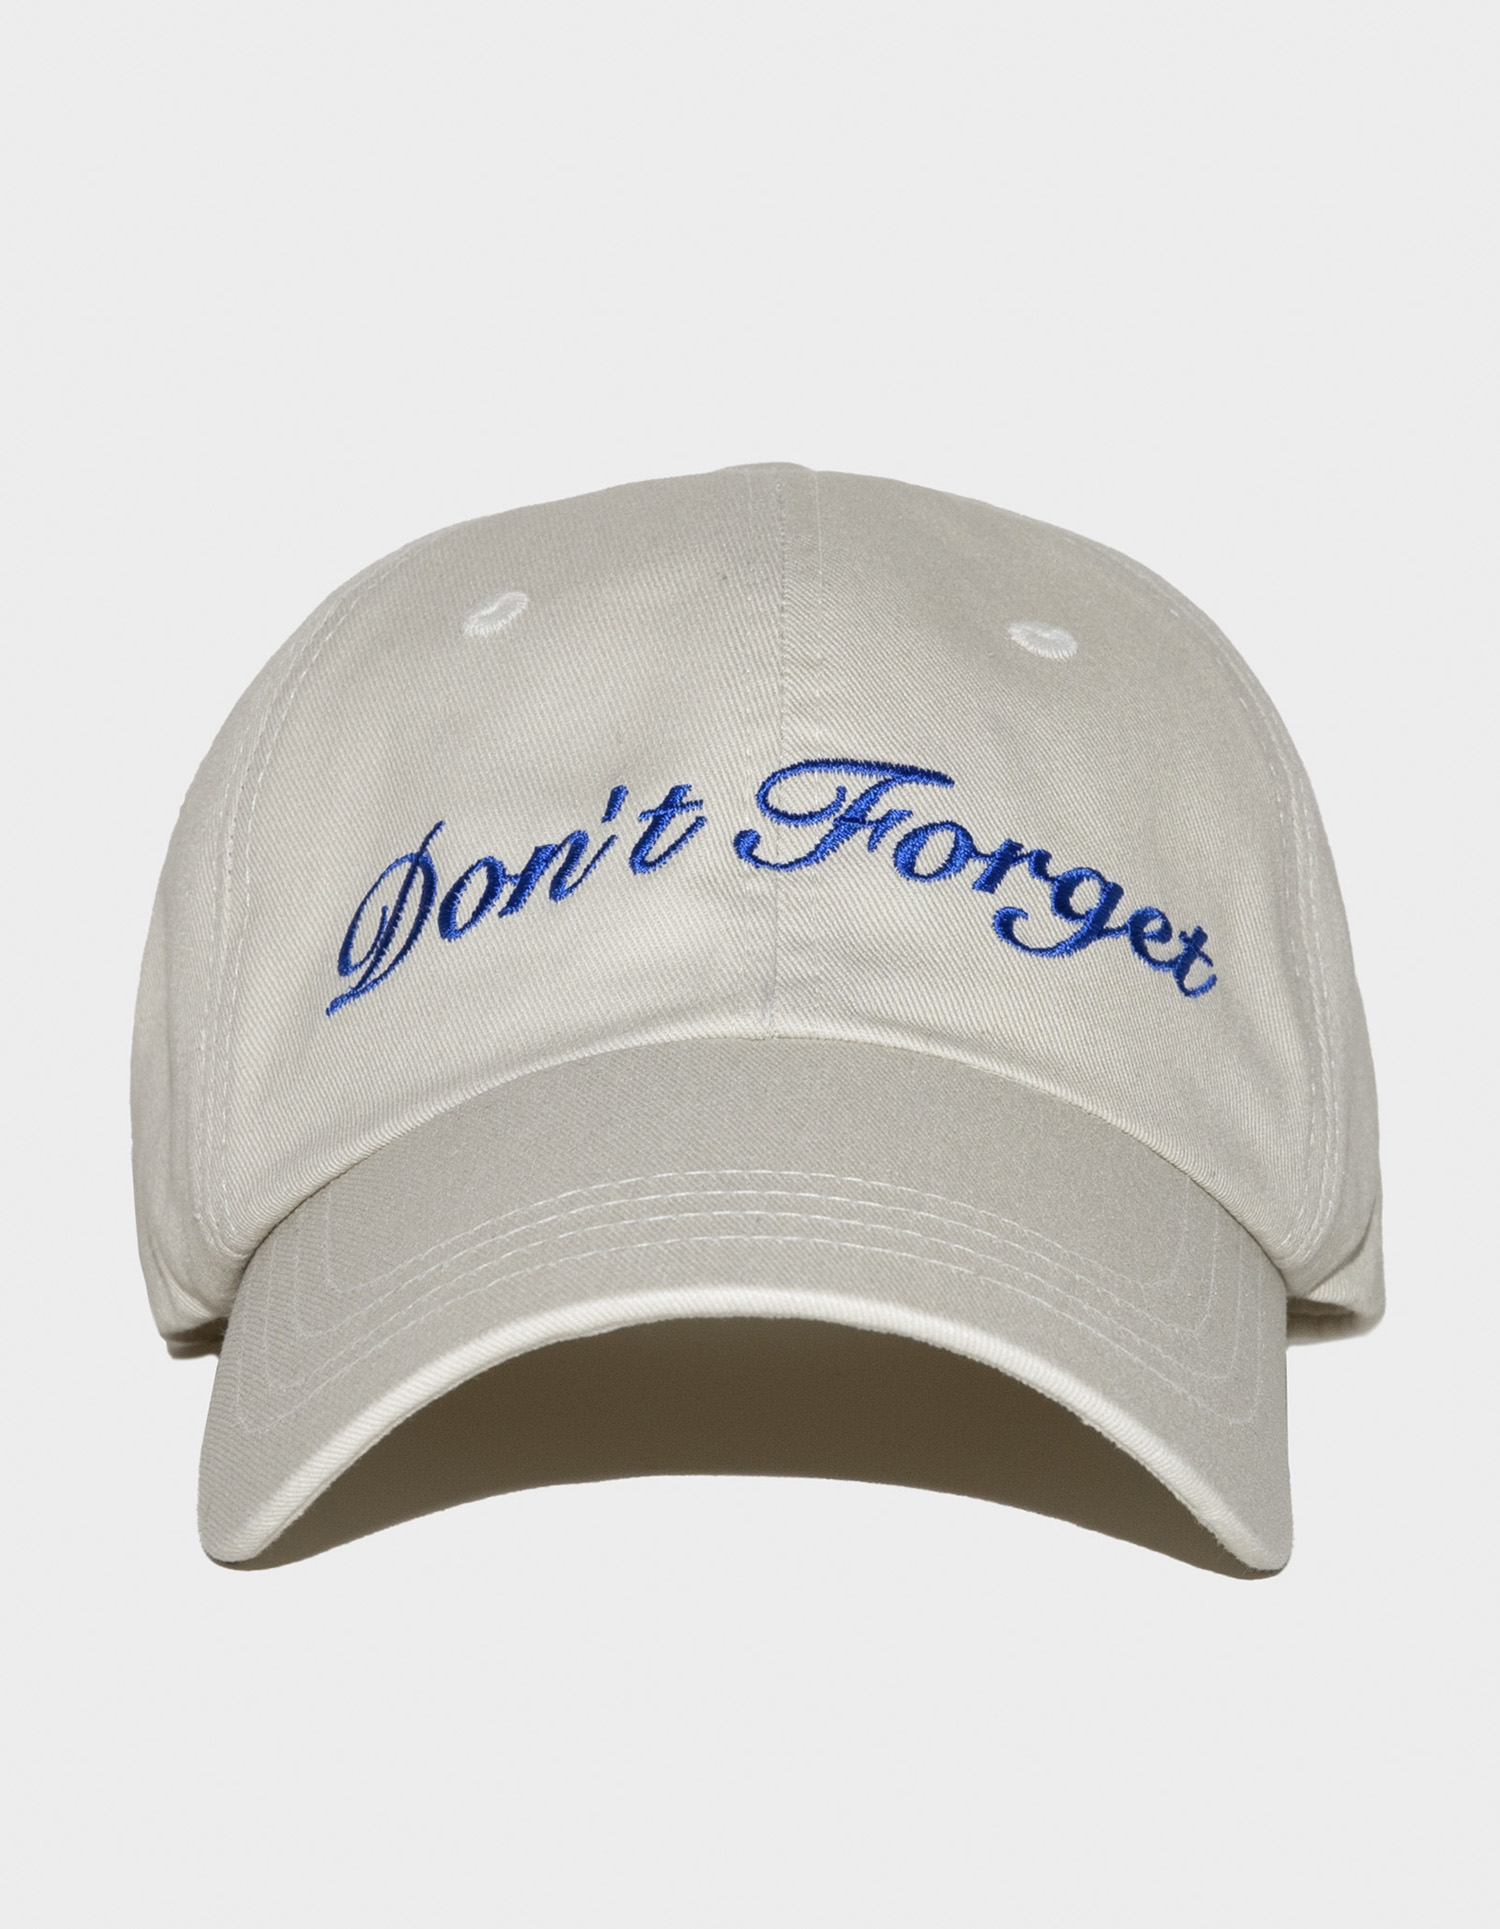 &#039;Don&#039;t Forget&#039; LOGO BALL CAP (BEIGE) - 포니테일